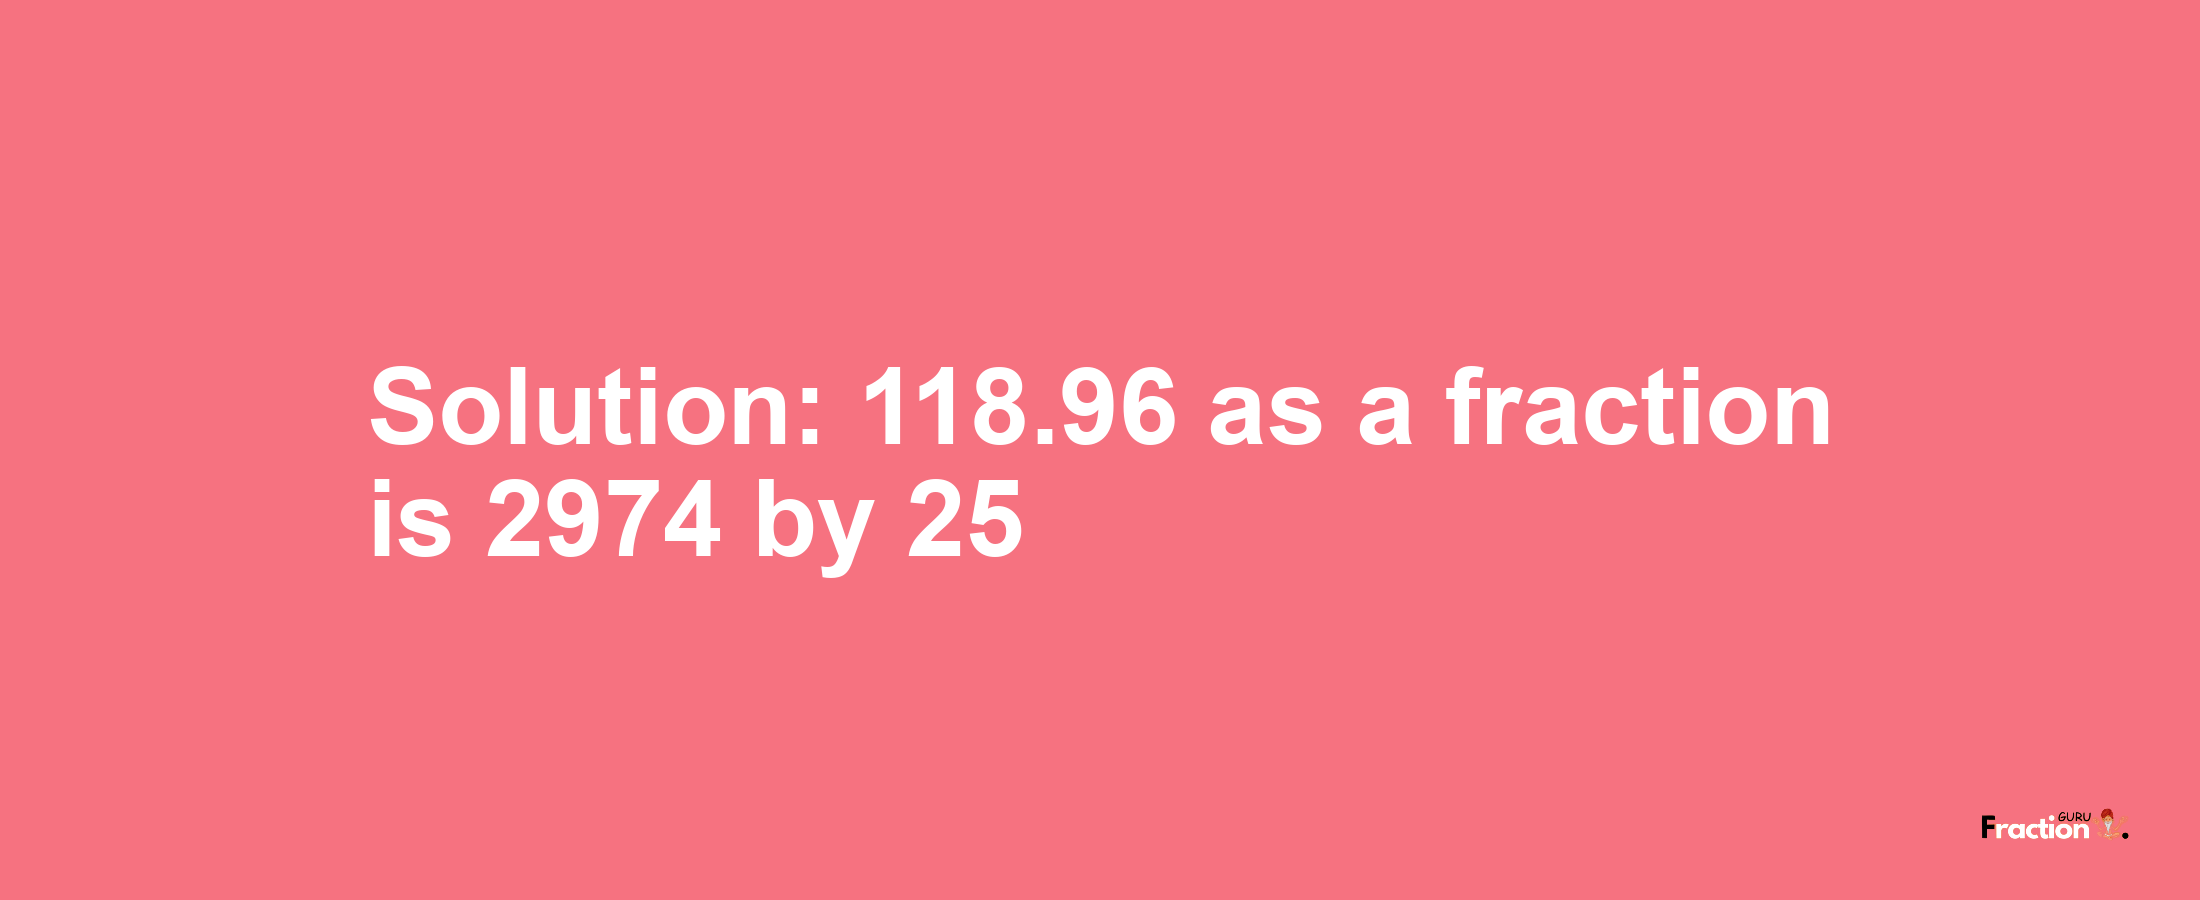 Solution:118.96 as a fraction is 2974/25